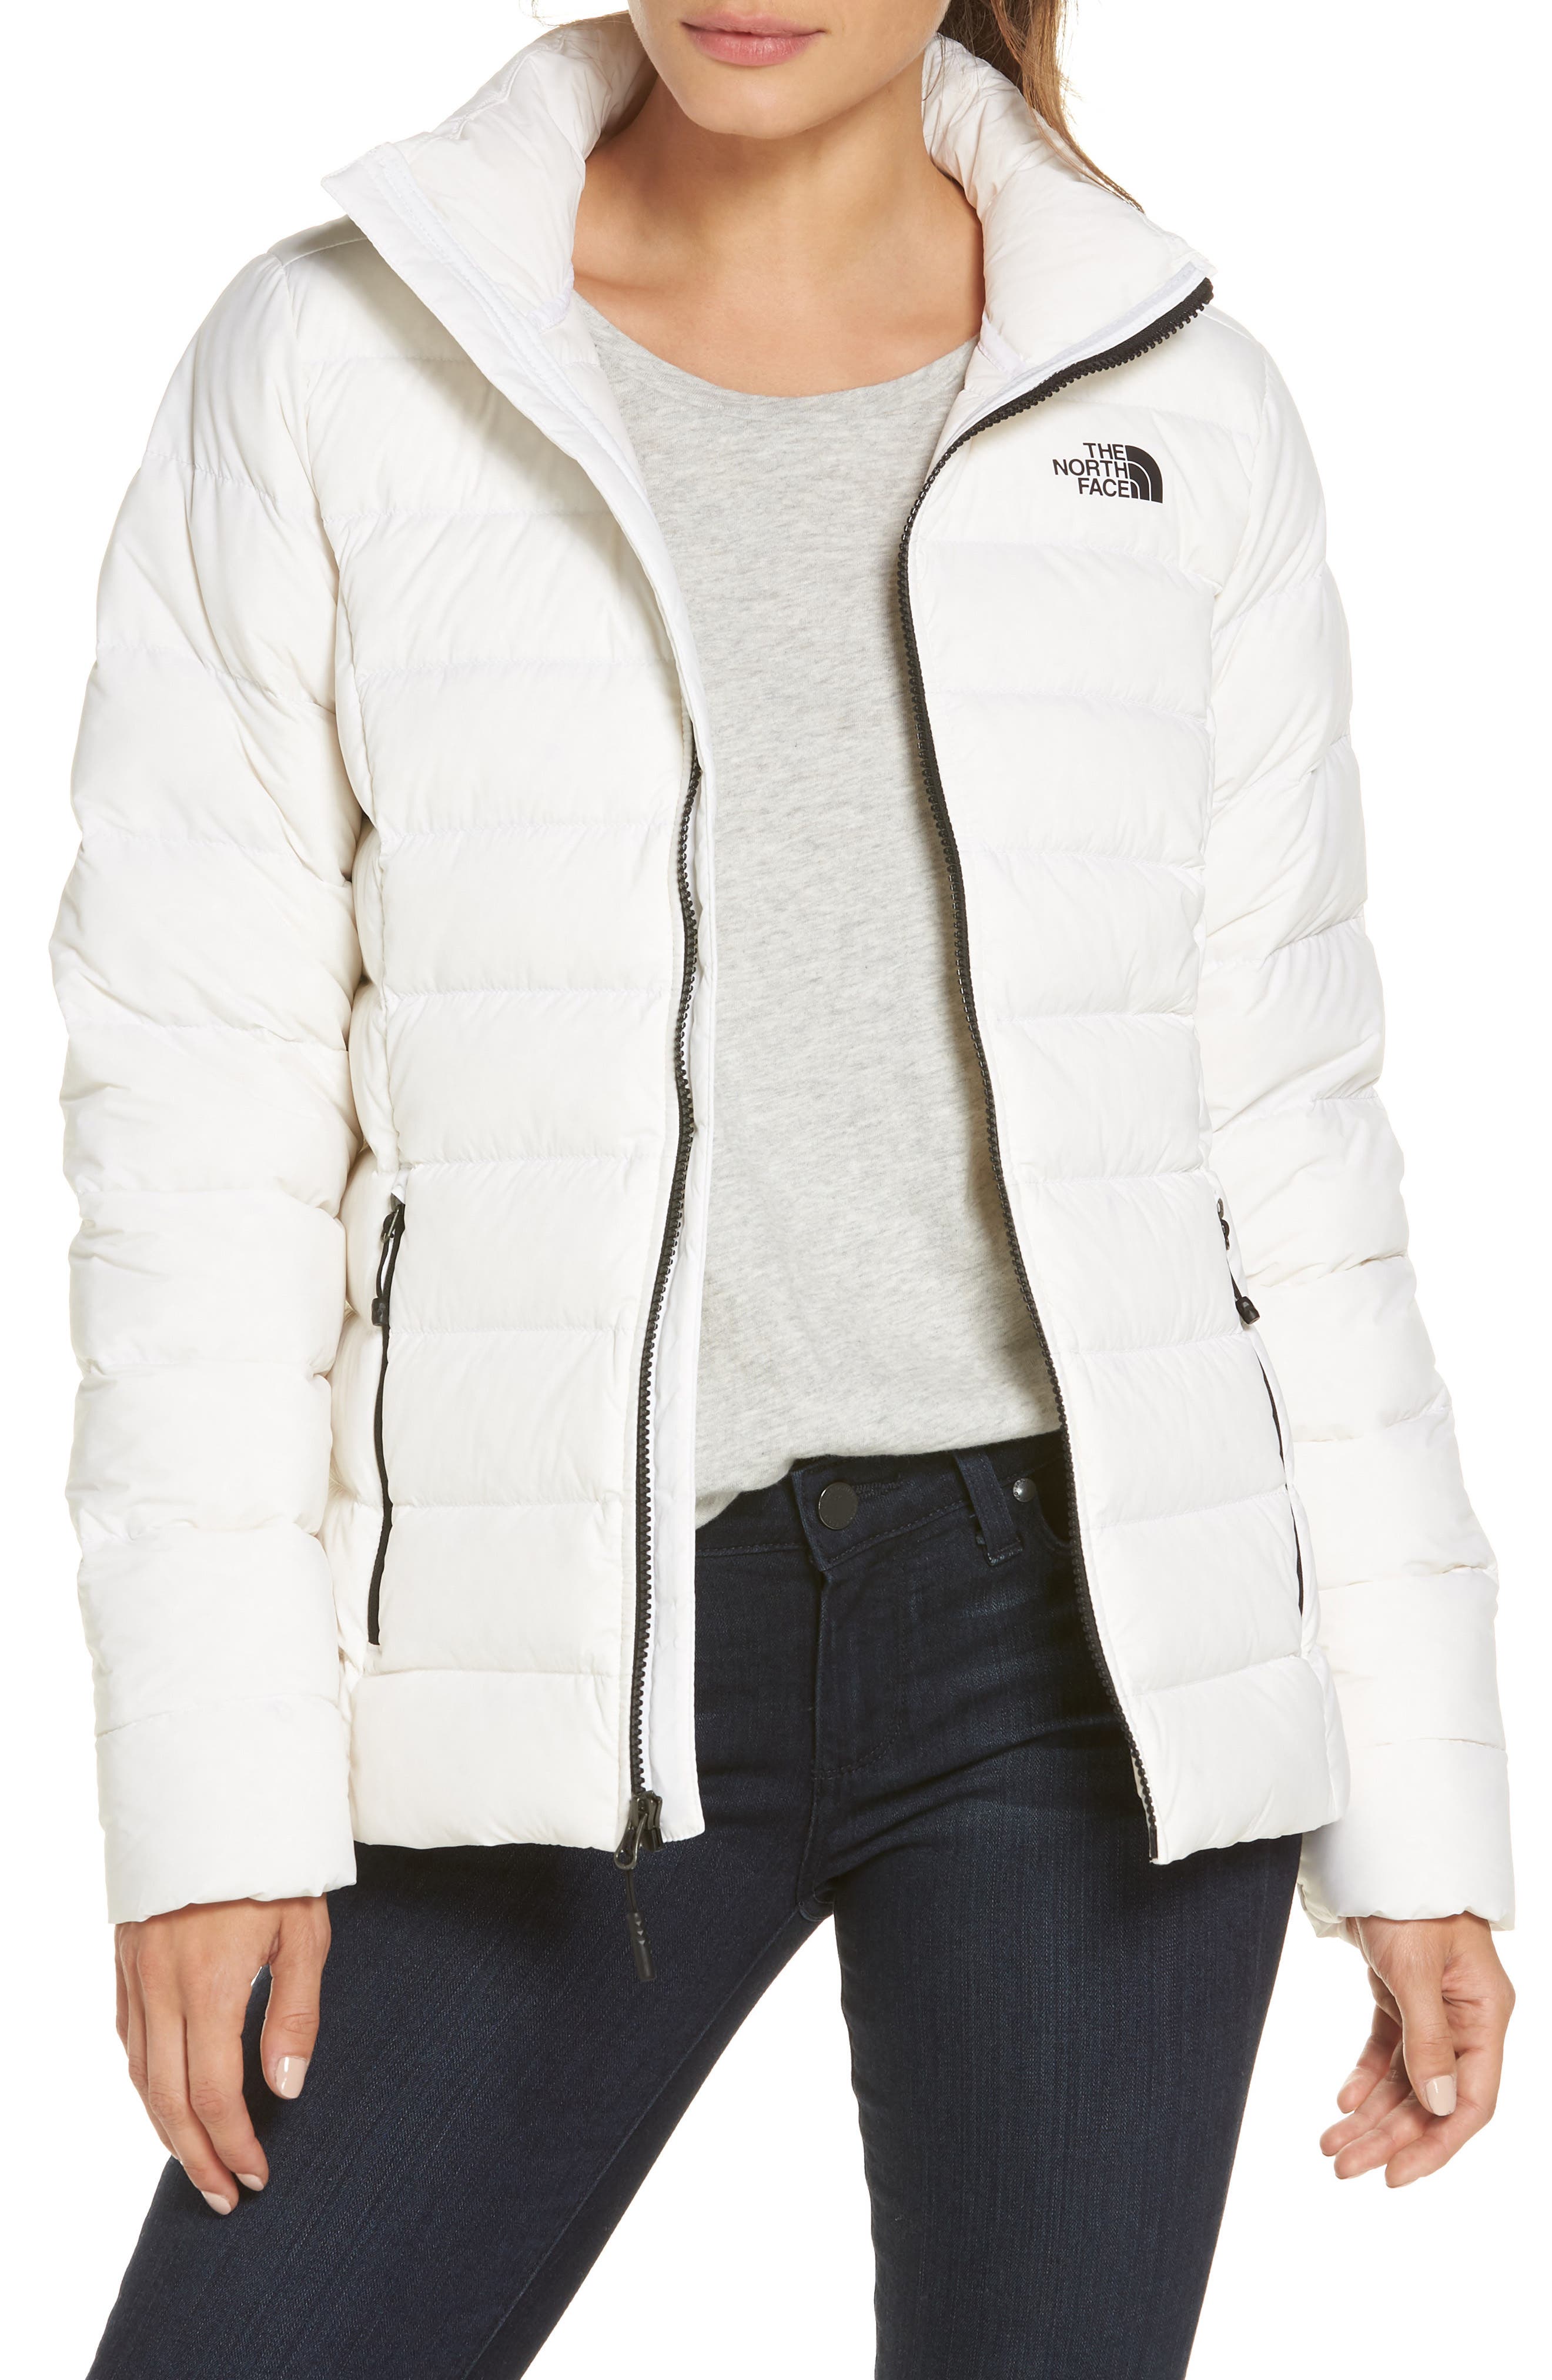 UPC 191928395092 - Women's The North Face Stretch Down Jacket, Size ...